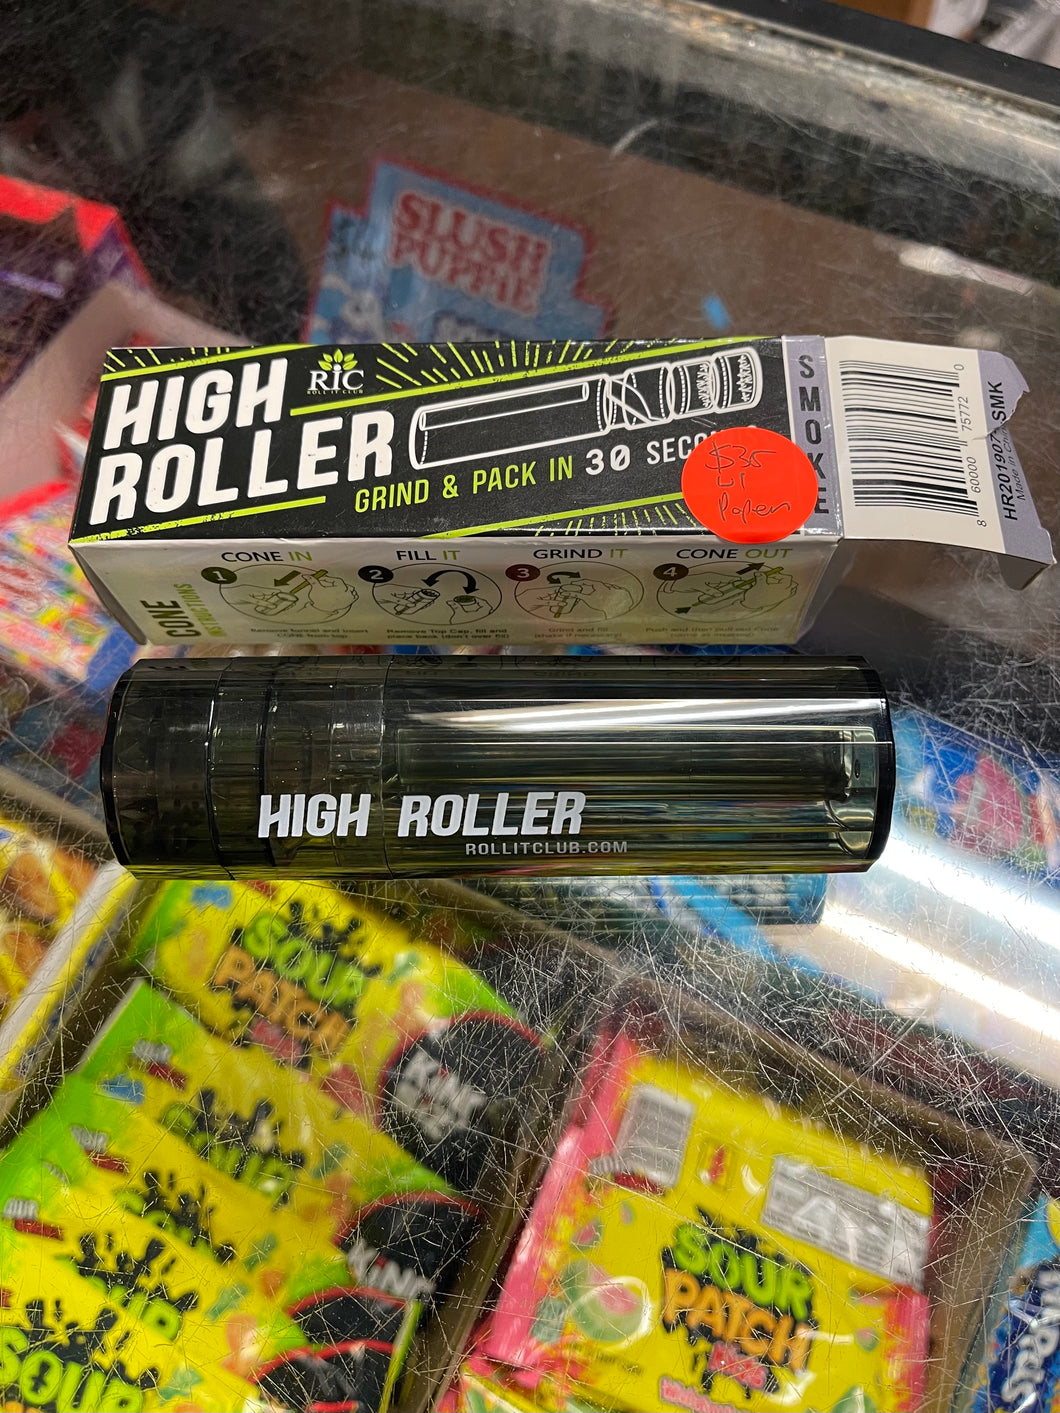 High Roller grinder and papers